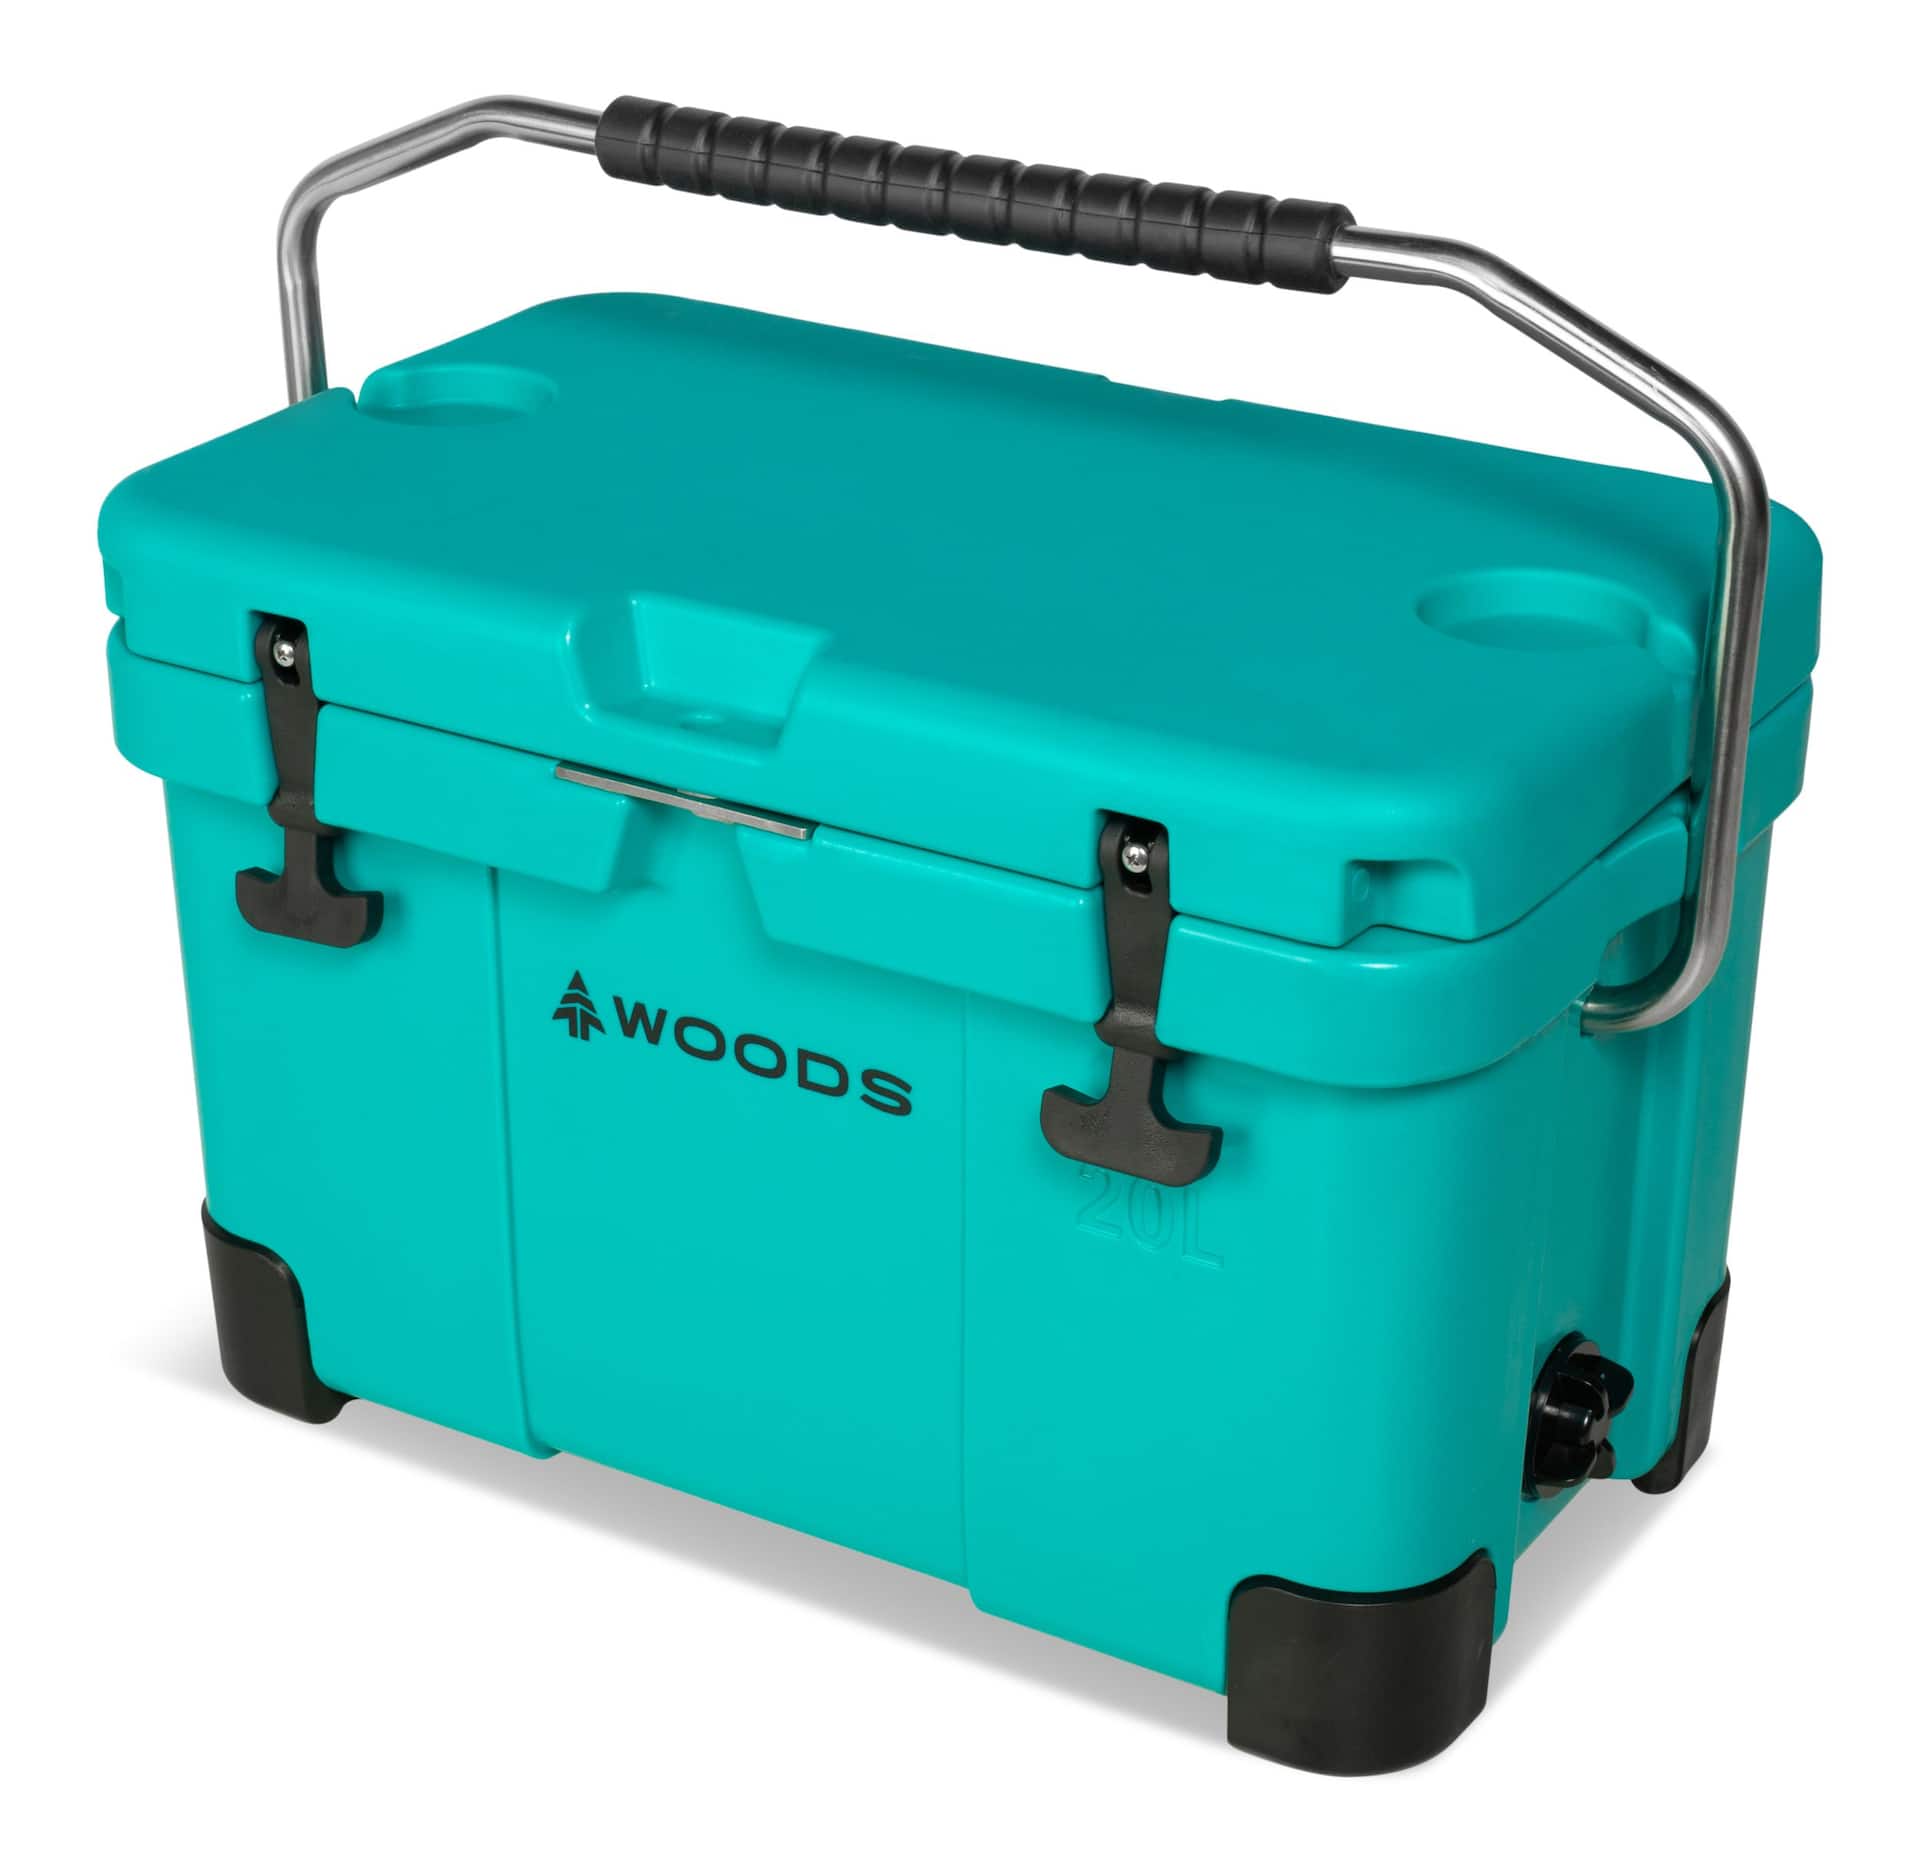 https://media-www.canadiantire.ca/product/playing/camping/hydration-coolers/0850304/woods-roto-20l-turquoise-b34dd5f4-a32c-4cb0-a249-92aac771da2f-jpgrendition.jpg